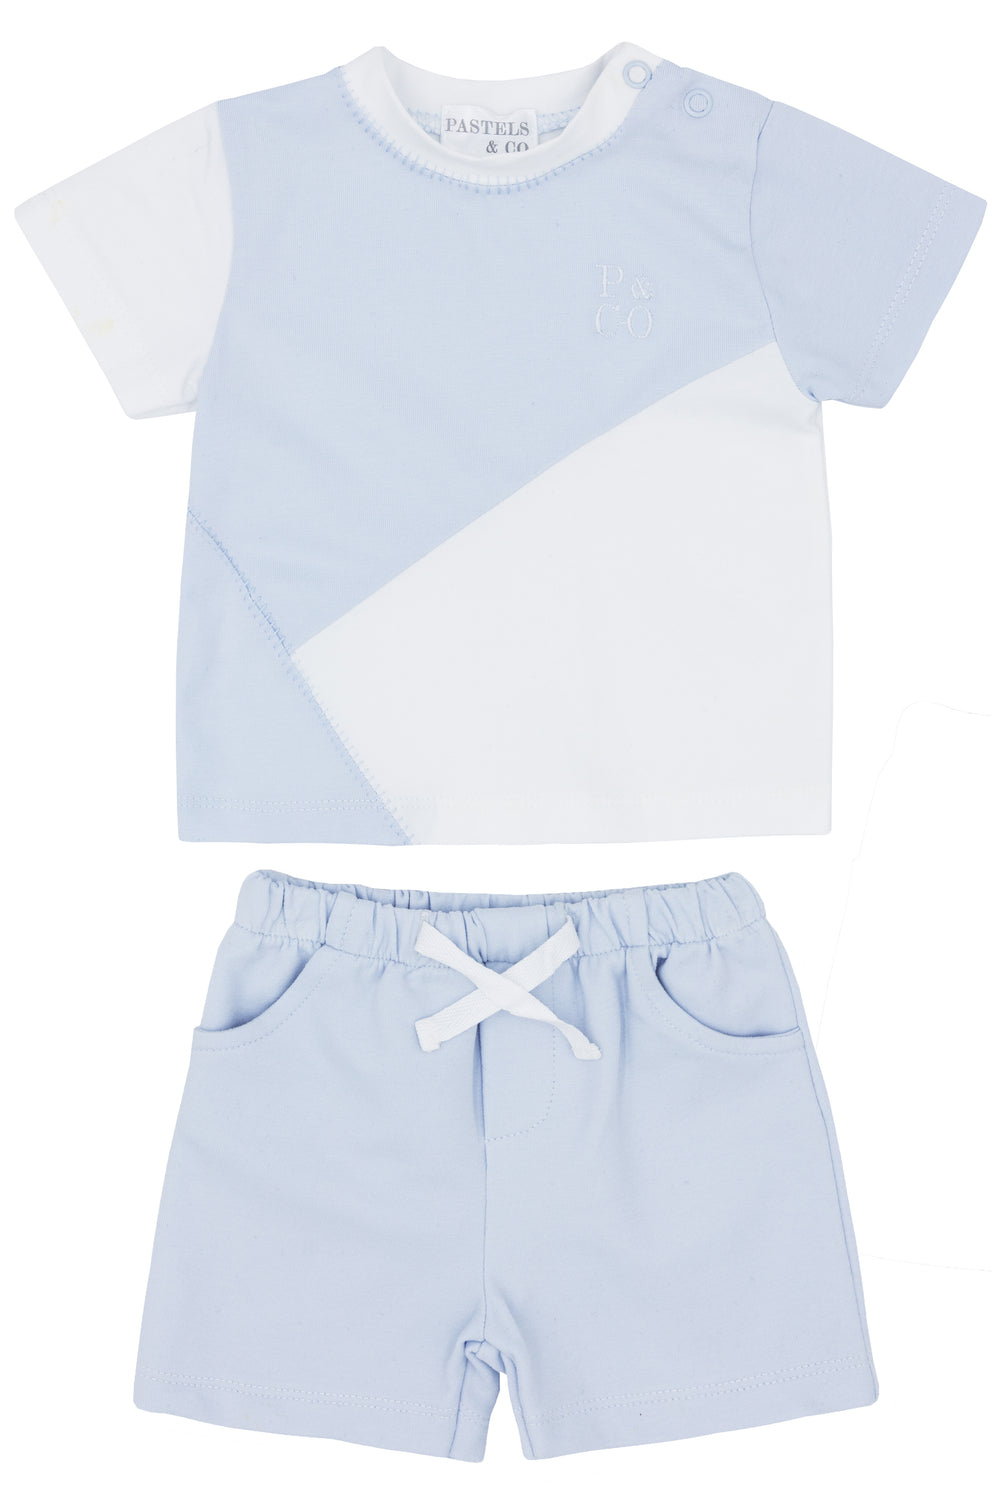 Pastels & Co "Clem" Baby Blue T-Shirt & Shorts | Millie and John